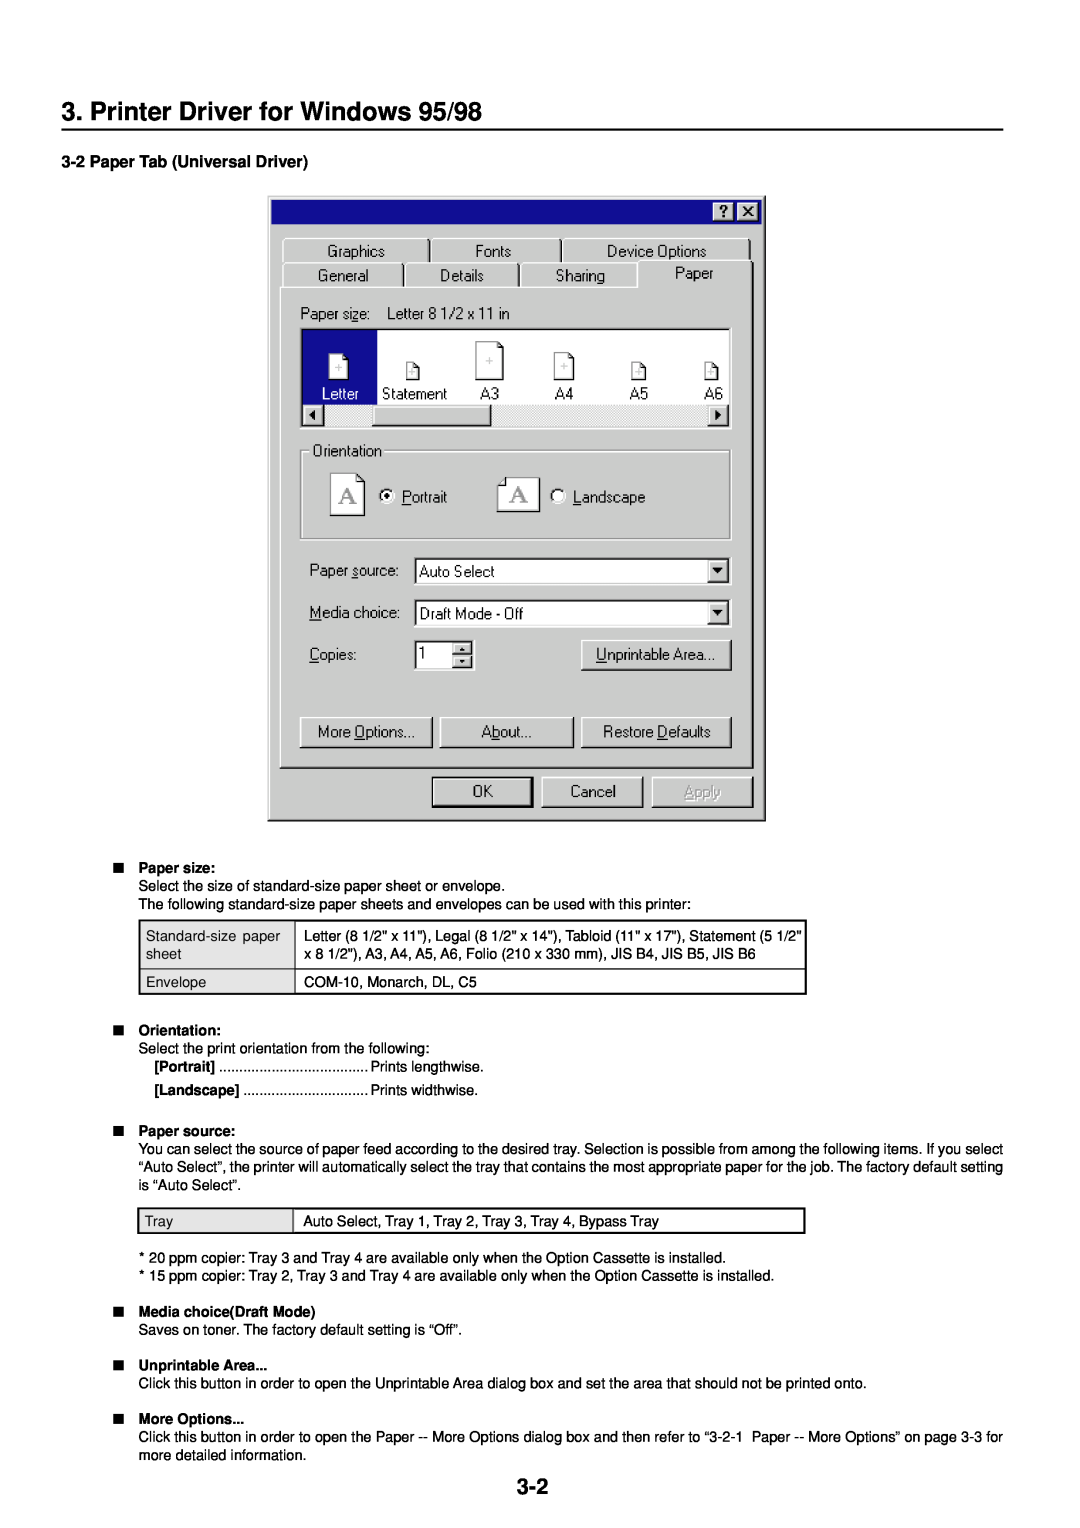 IBM Printing System Printer Driver for Windows 95/98, Paper Tab Universal Driver, Paper size, Orientation, Paper source 